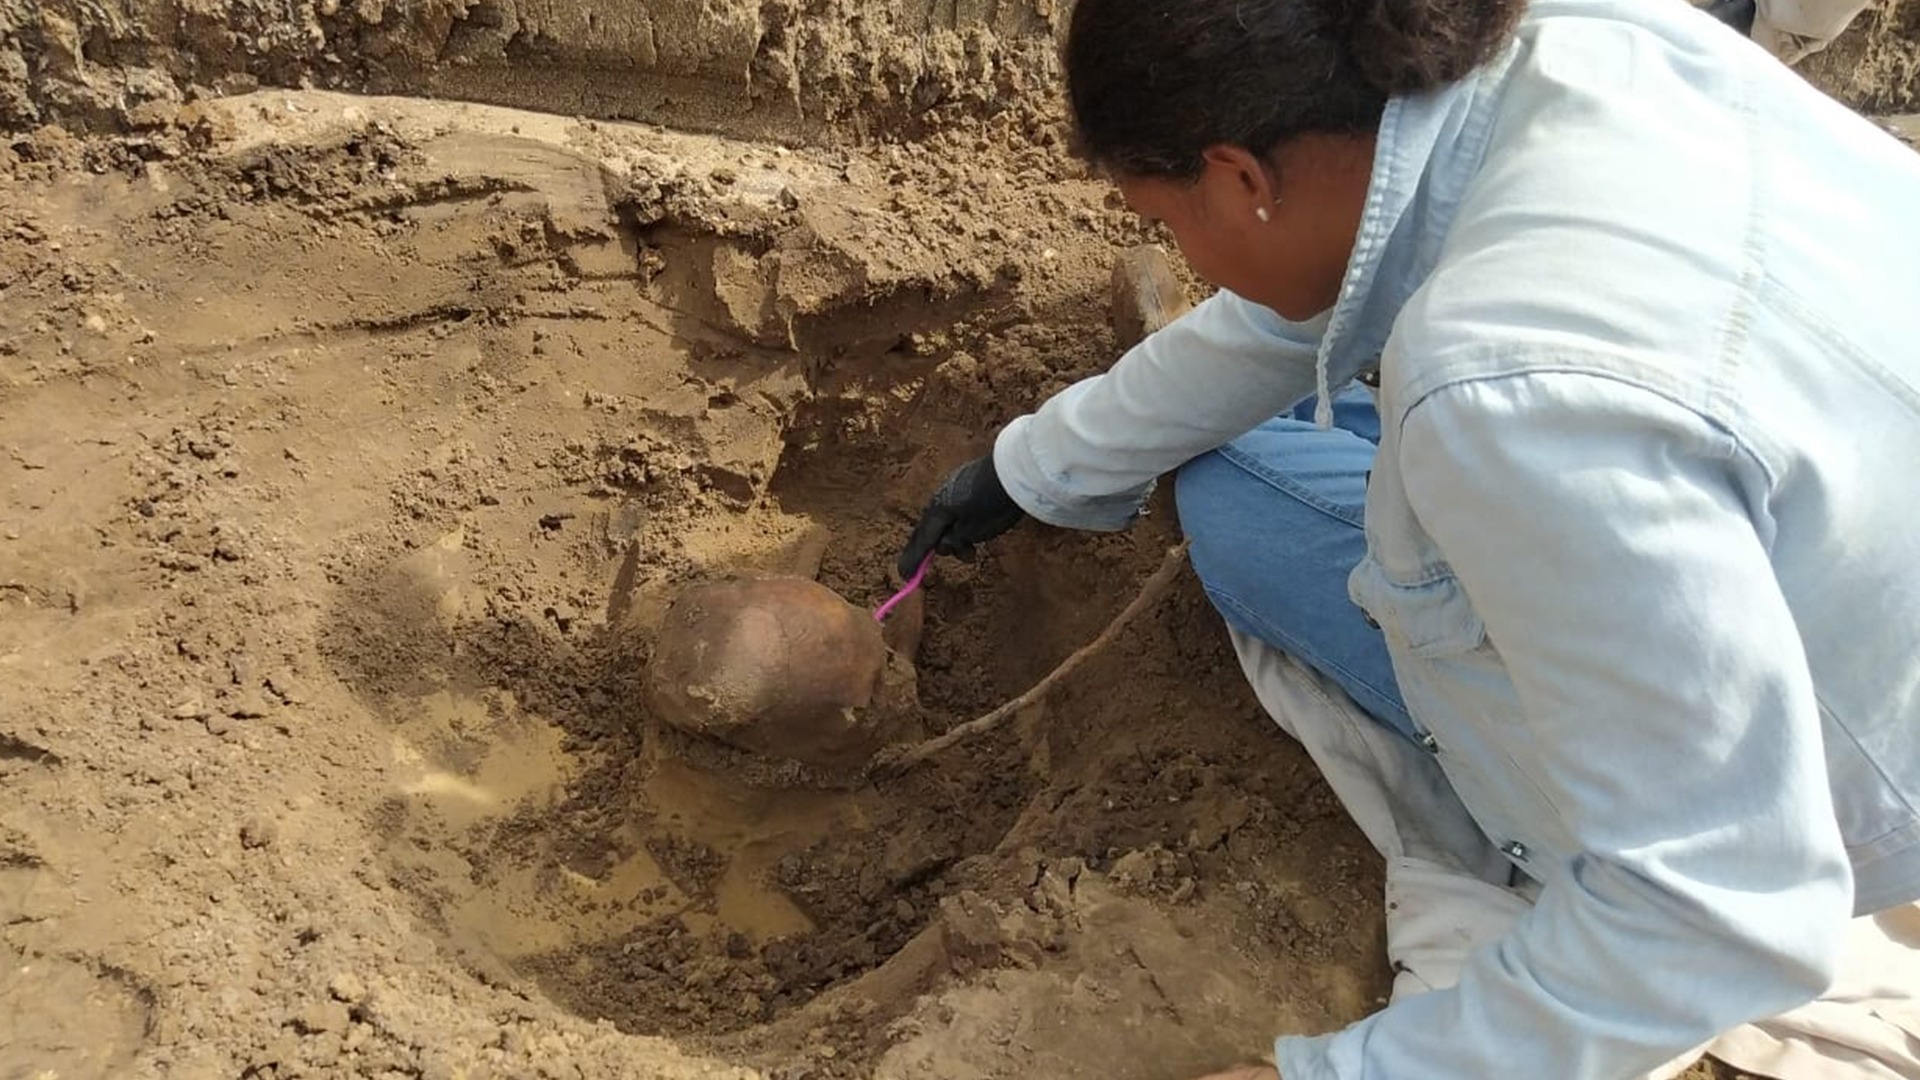 Remains of hunter-gatherers who lived 10,000 years ago have been found in Brazil